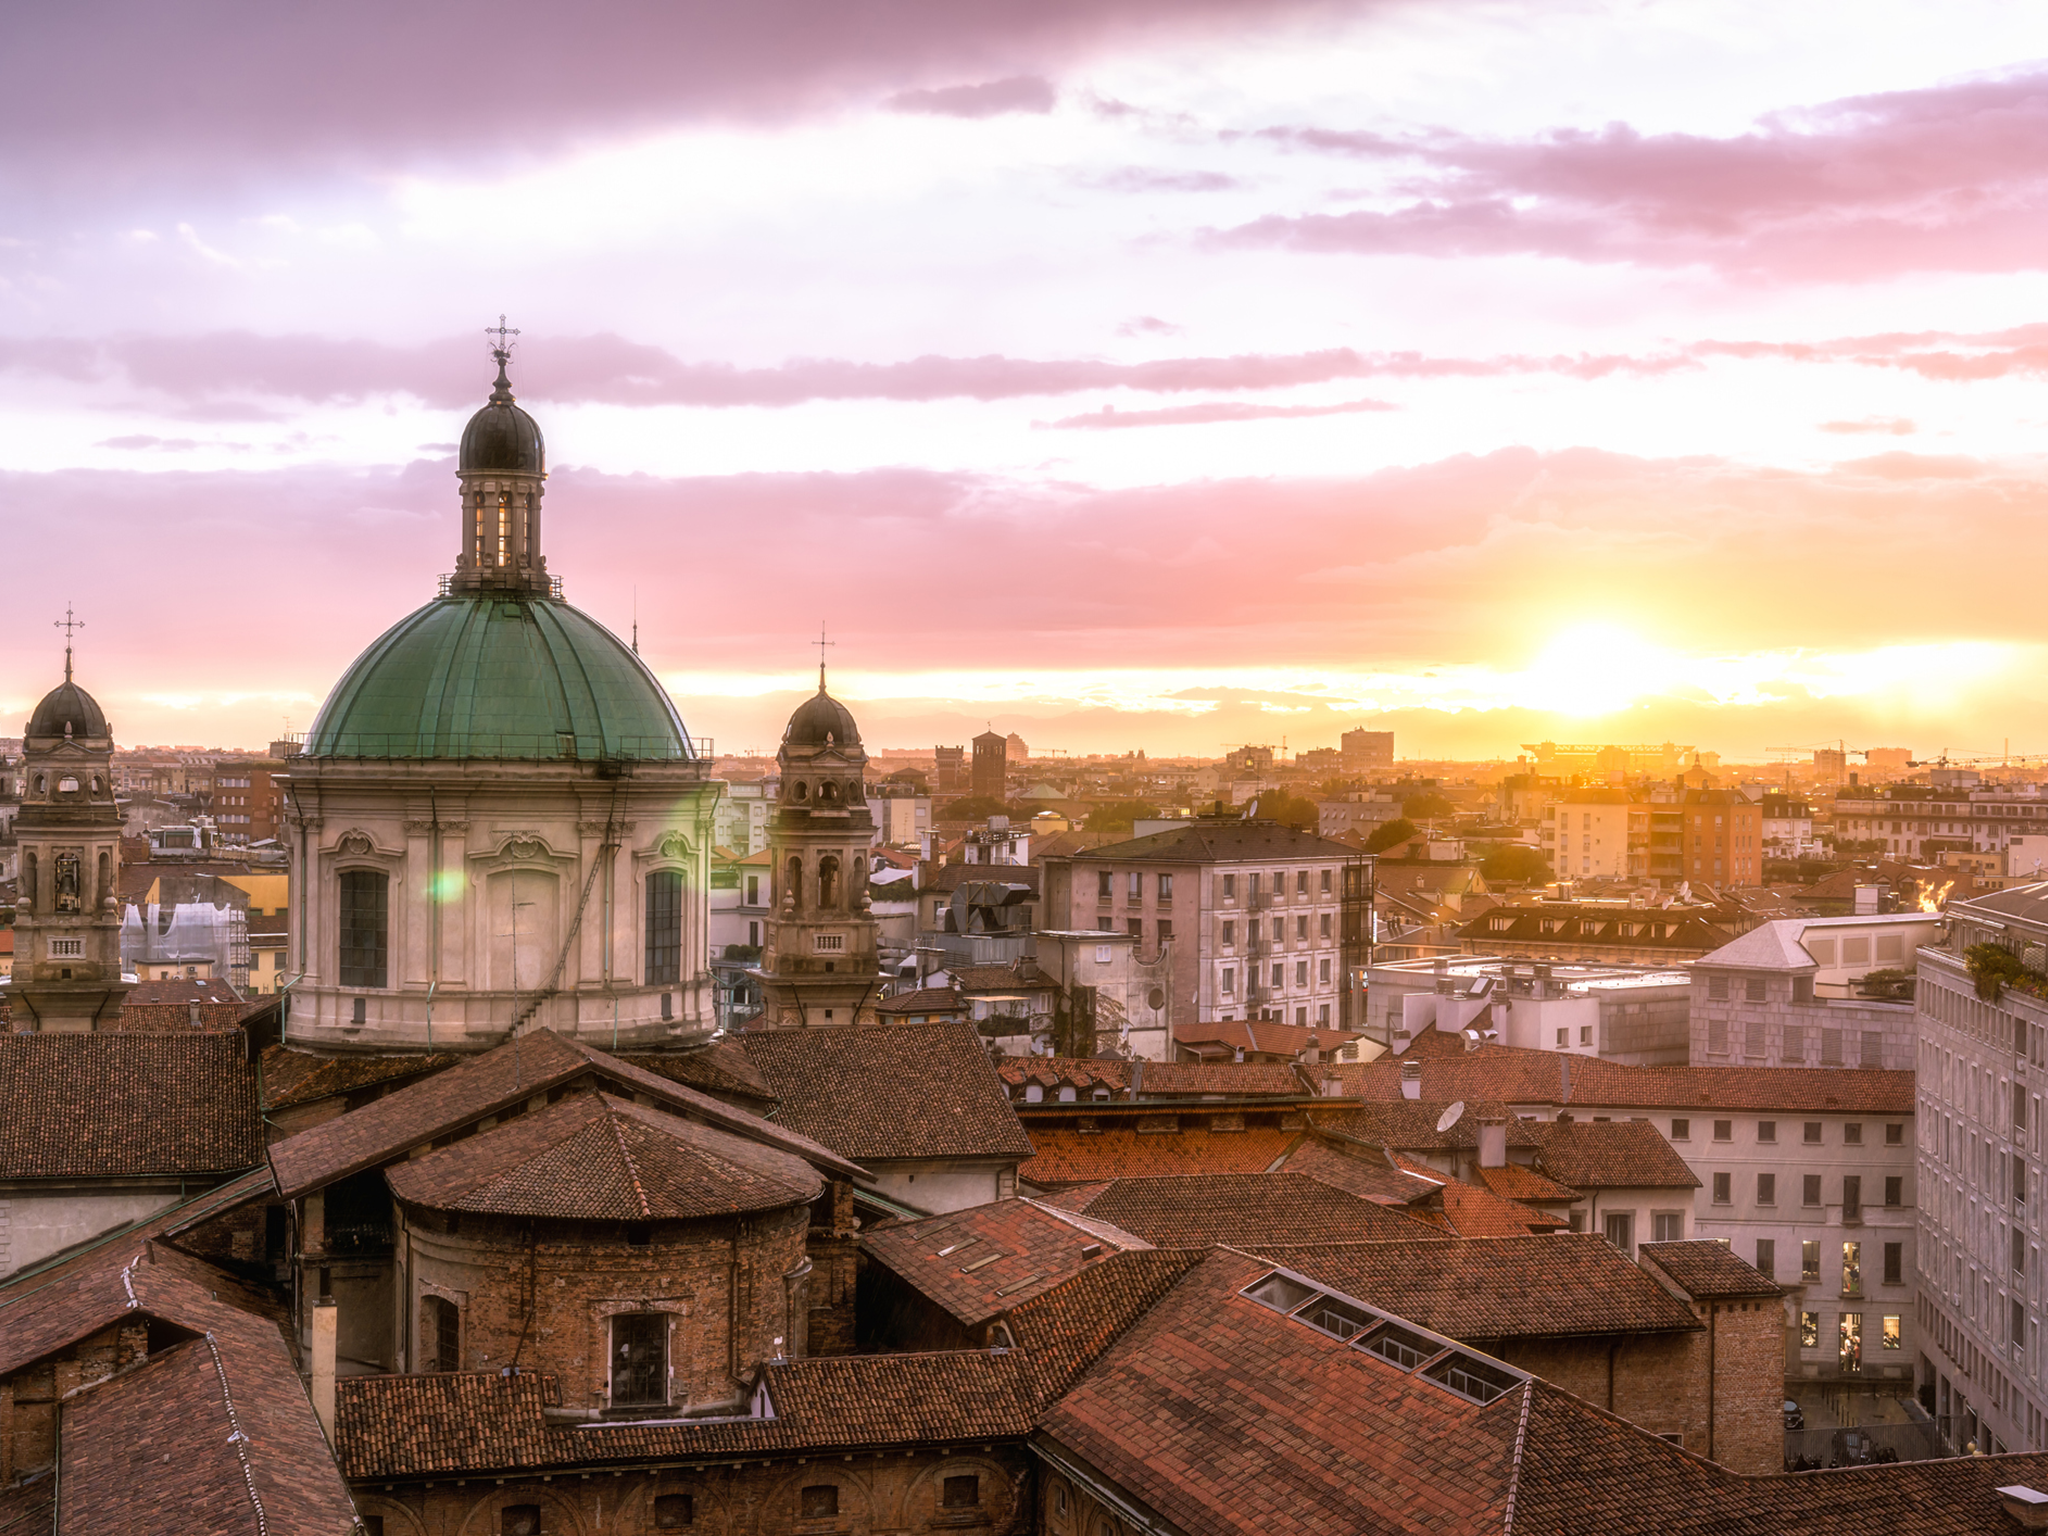 The Duomo and high-class shops are outstanding, but there’s much more to this city